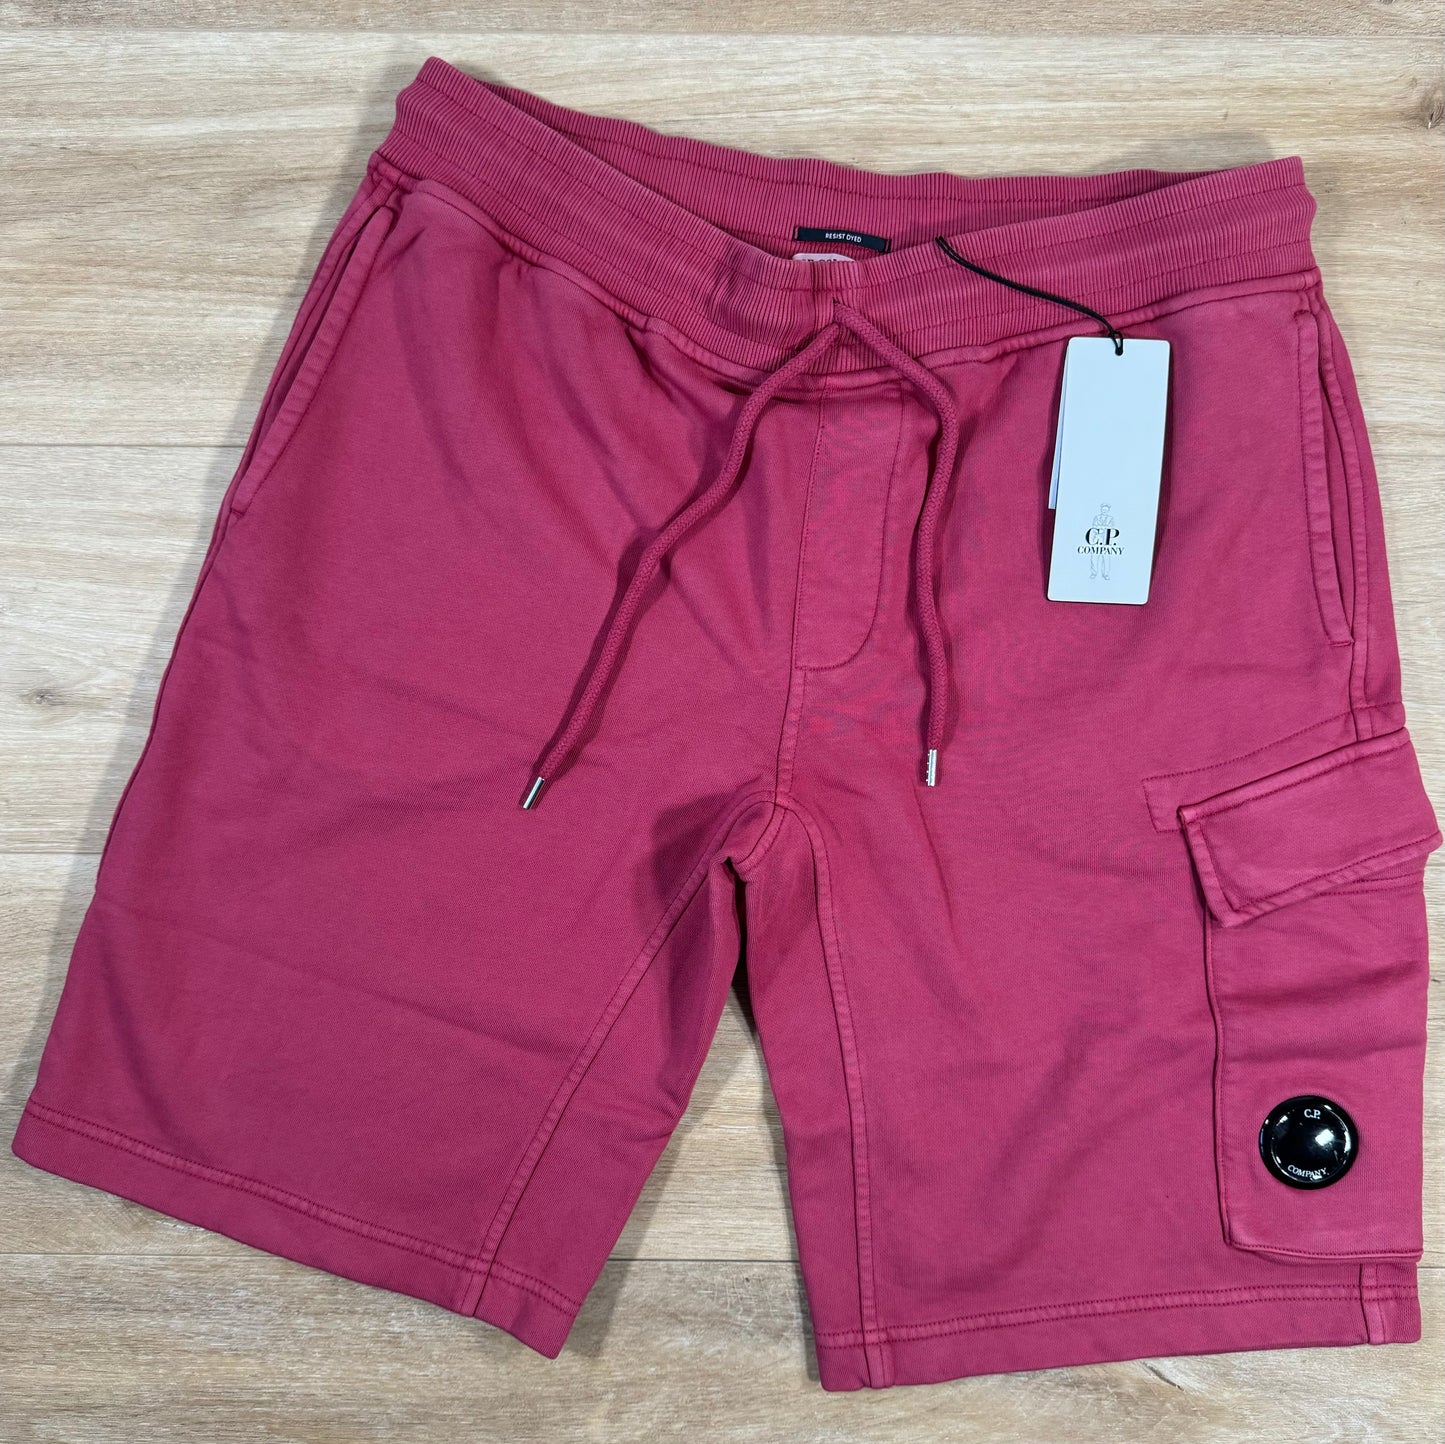 C.P. Company Cotton Fleece Lens Shorts in Red Bud